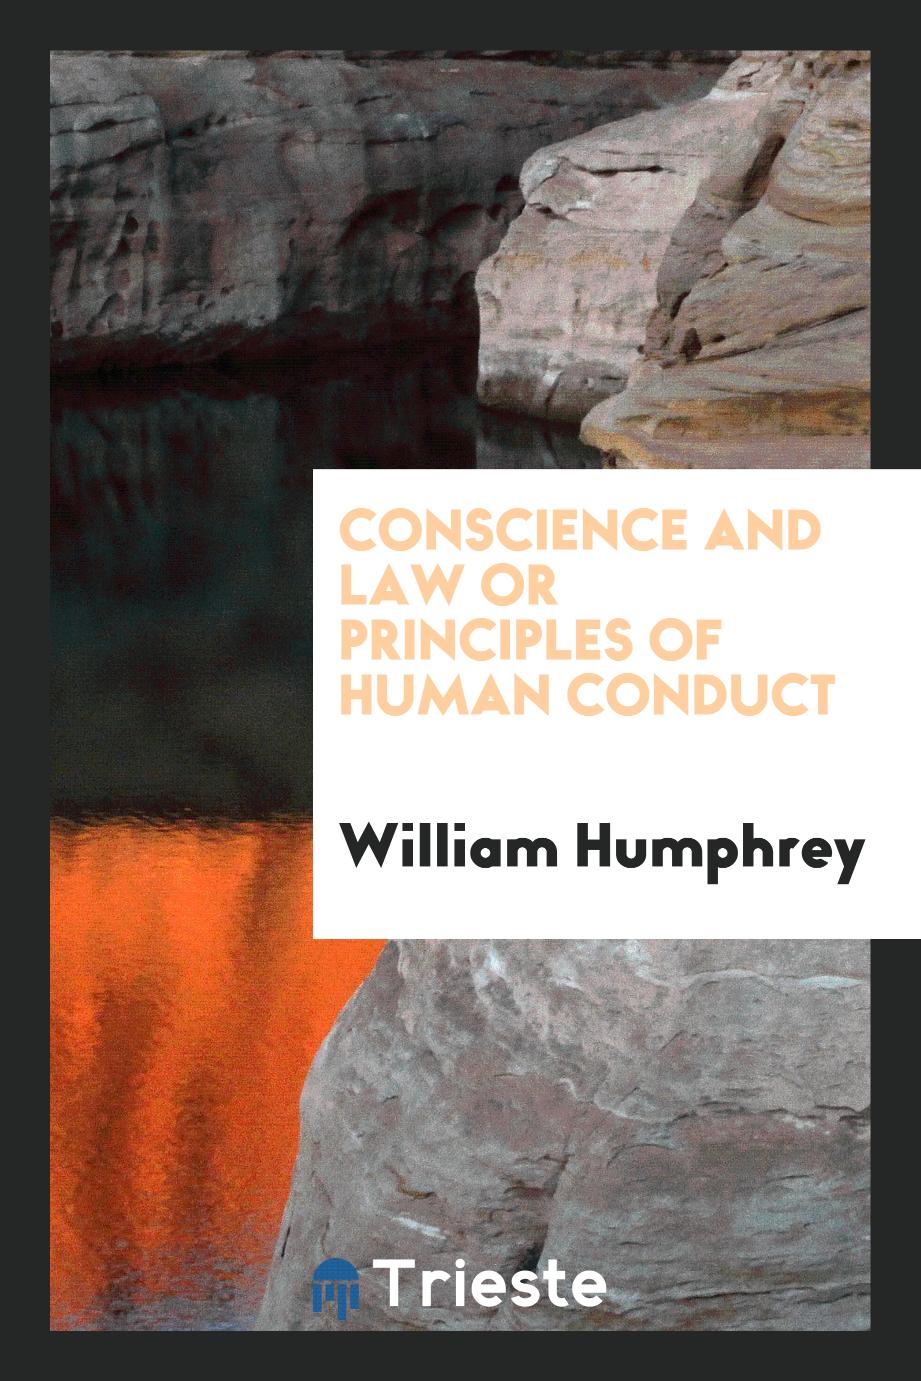 Conscience and law or Principles of human conduct